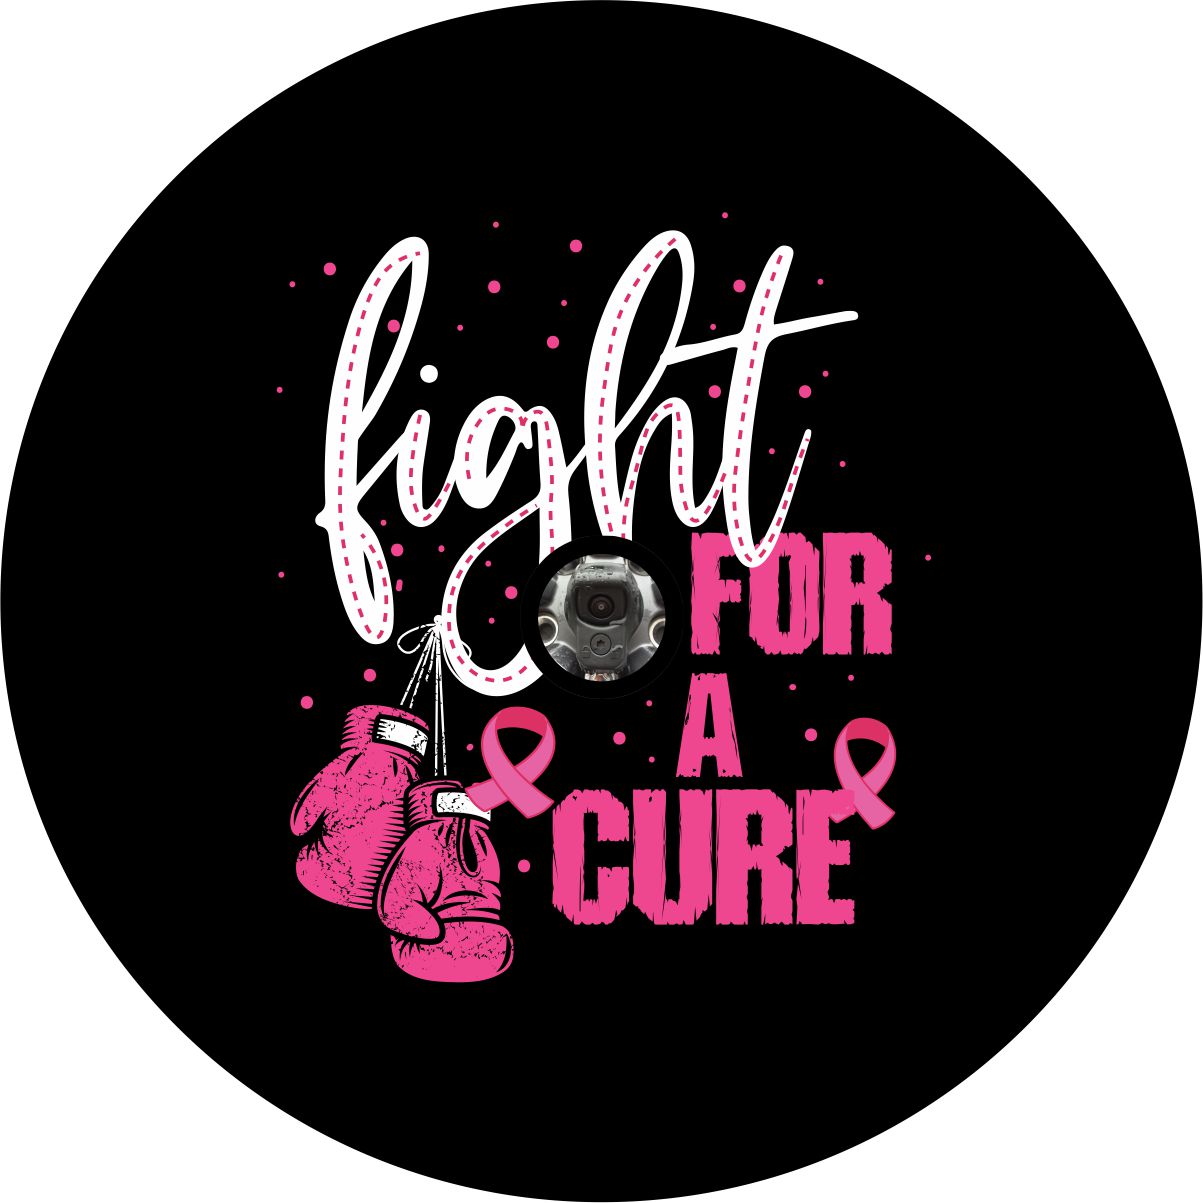 Pink fight for a cure breast cancer awareness and support spare-tirecovers.com spare tire cover design with a camera hole for a back up camera